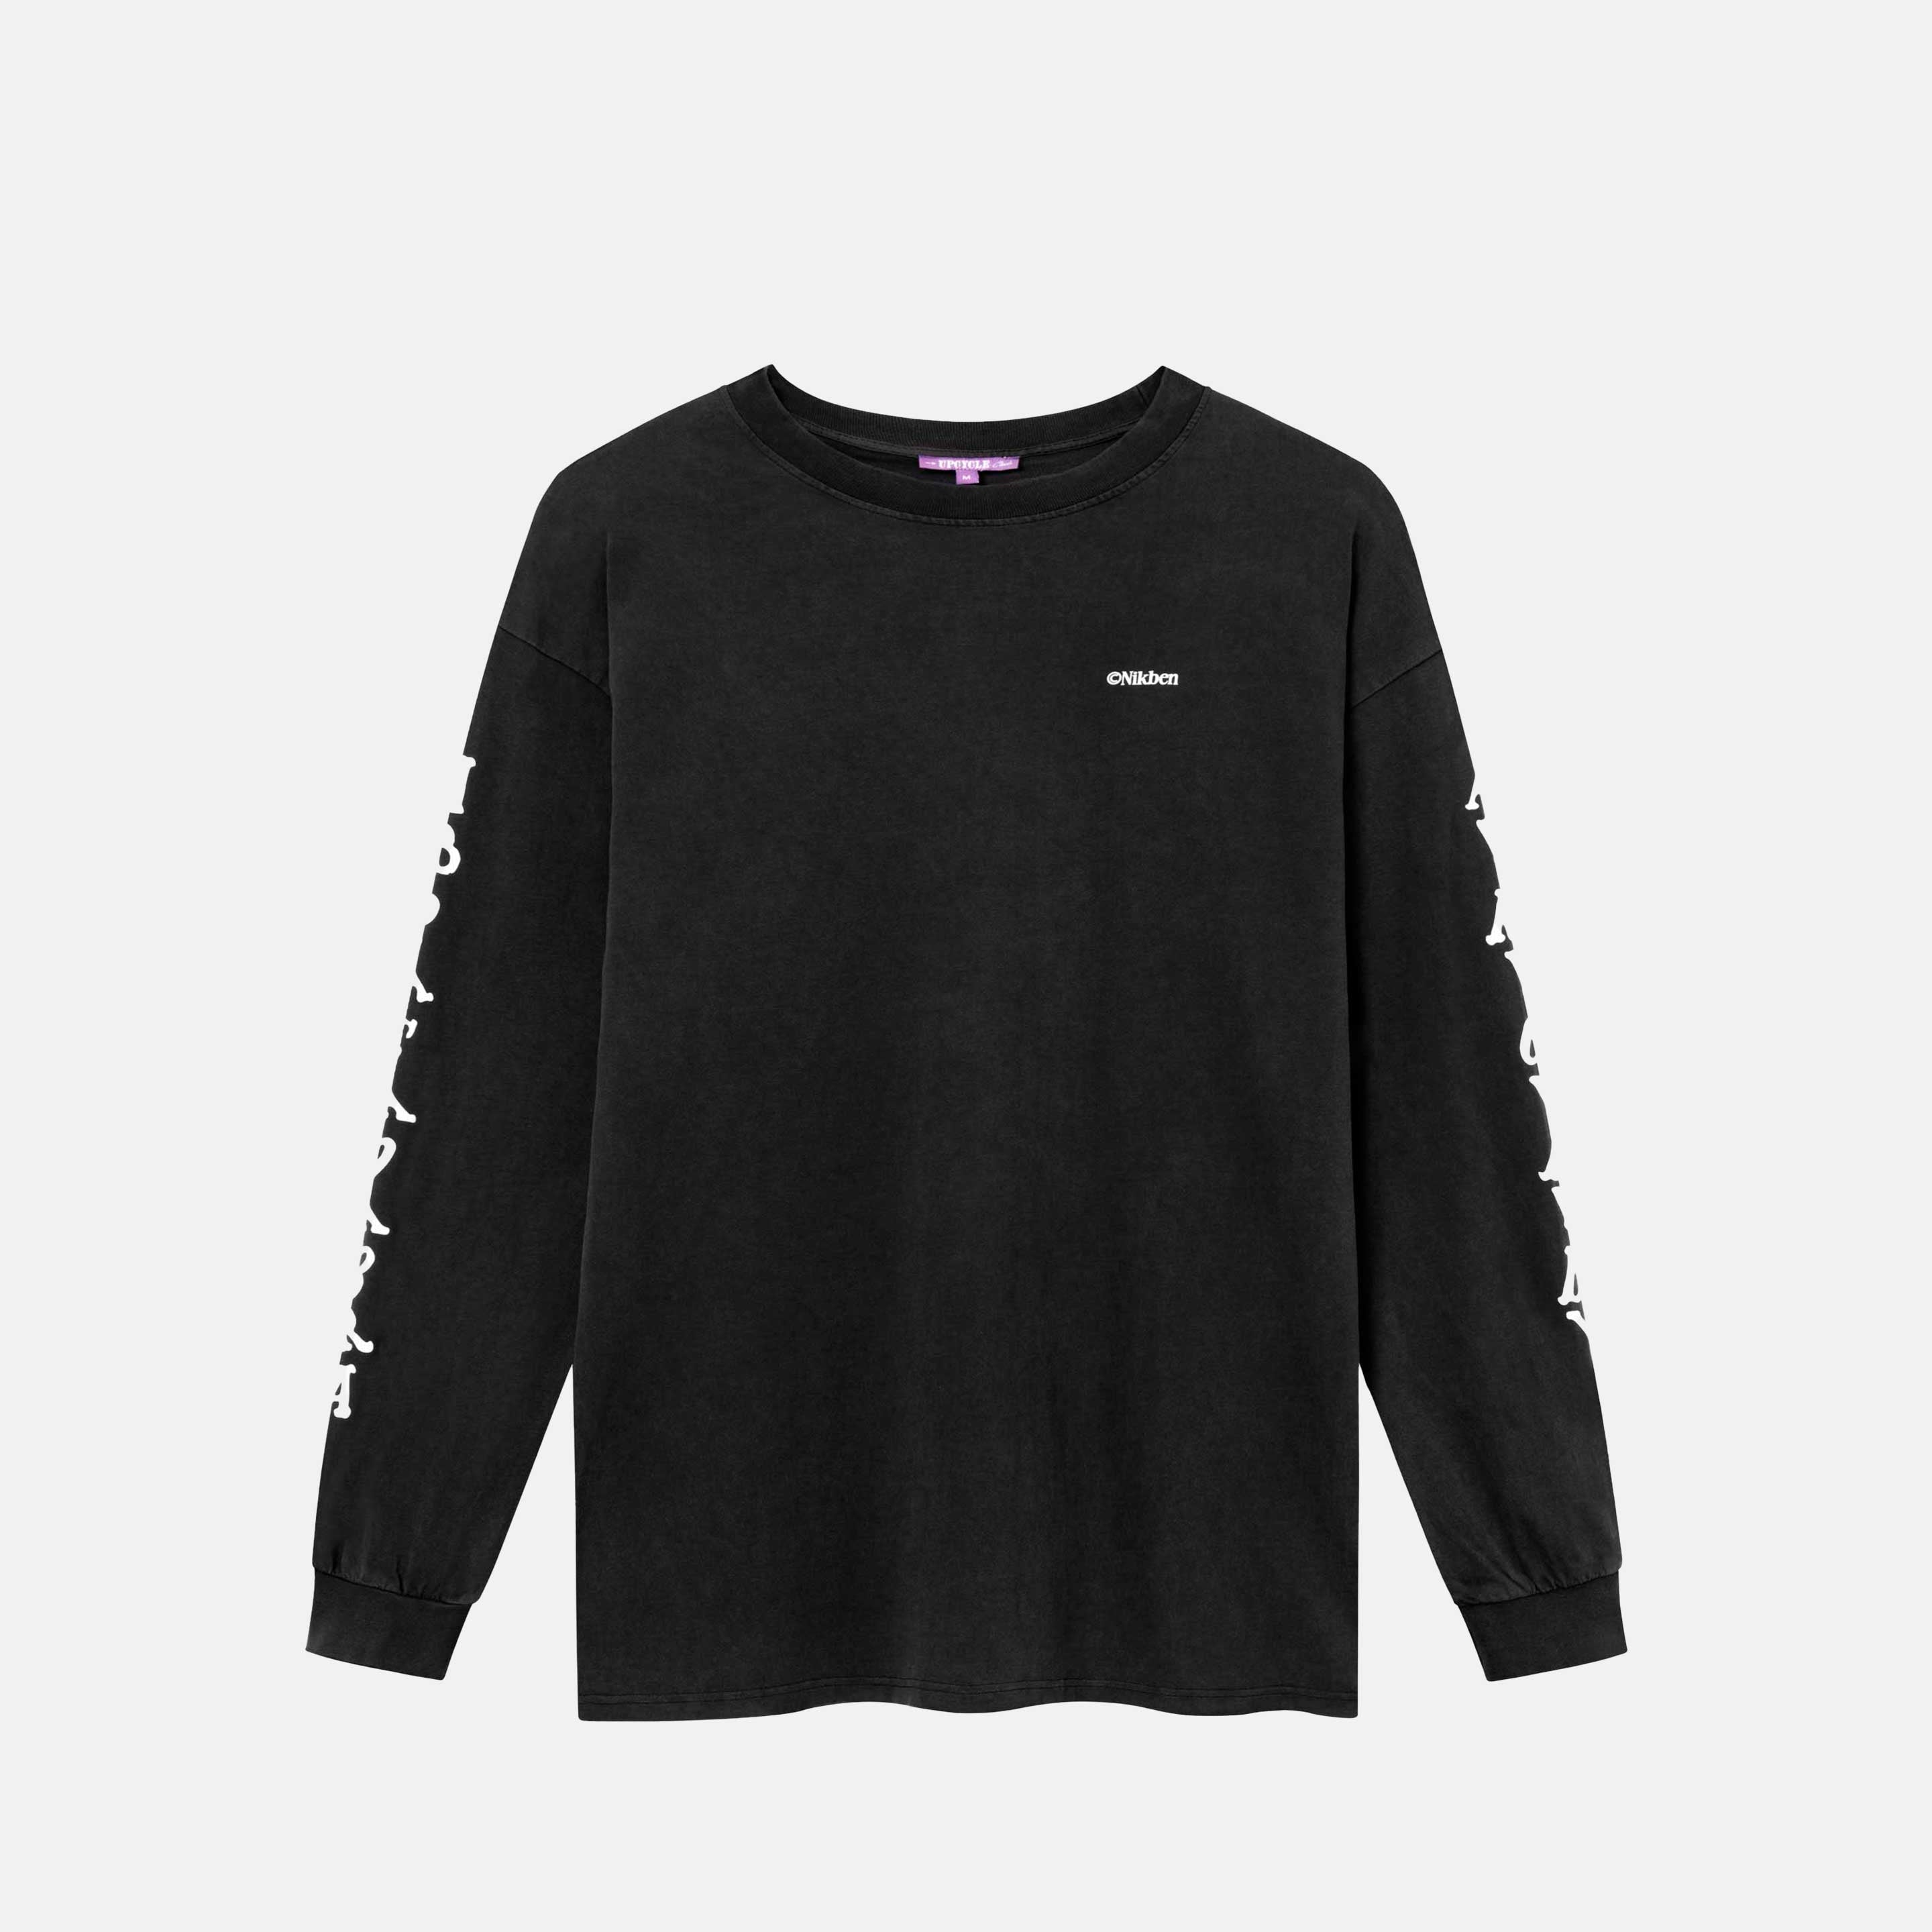 Black long-sleeved t-shirt with small white logo on the chest and white print on the sleeves.